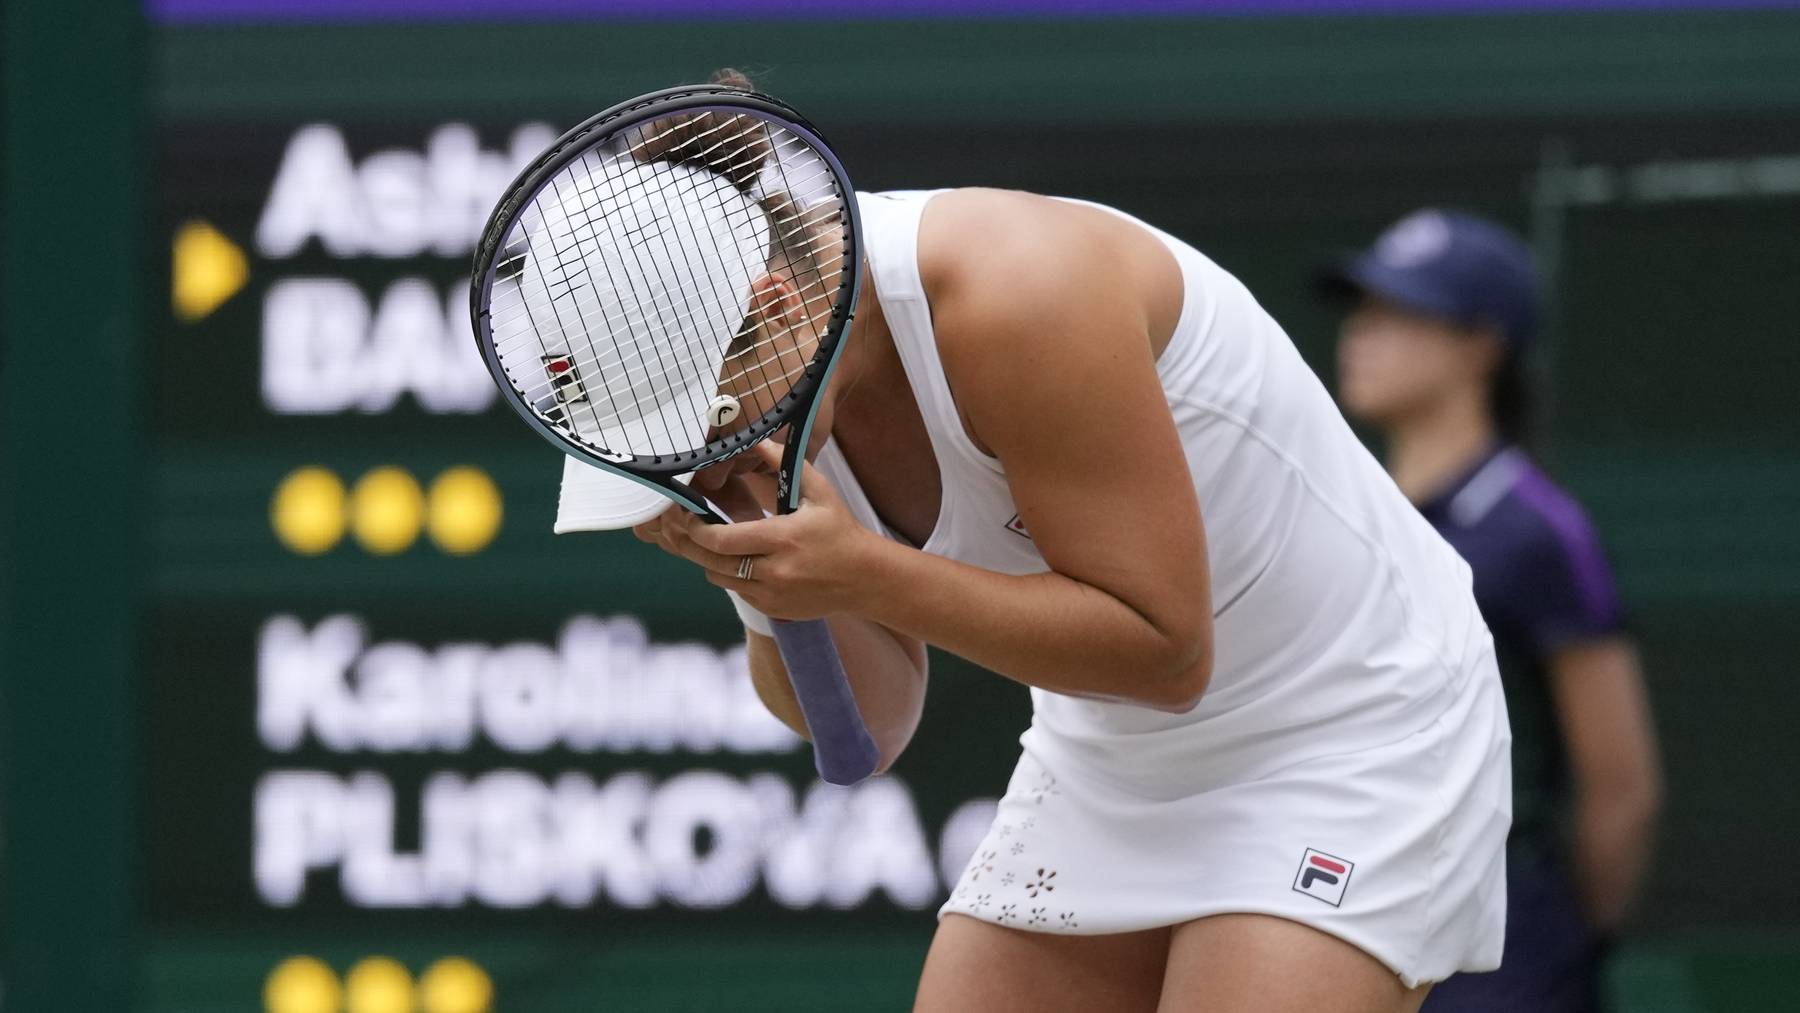 Australia's Ashleigh Barty reacts after defeating the Czech Republic's Karolina Pliskova in the women's singles final on day twelve of the Wimbledon Tennis Championships in London, Saturday, July 10, 2021. 